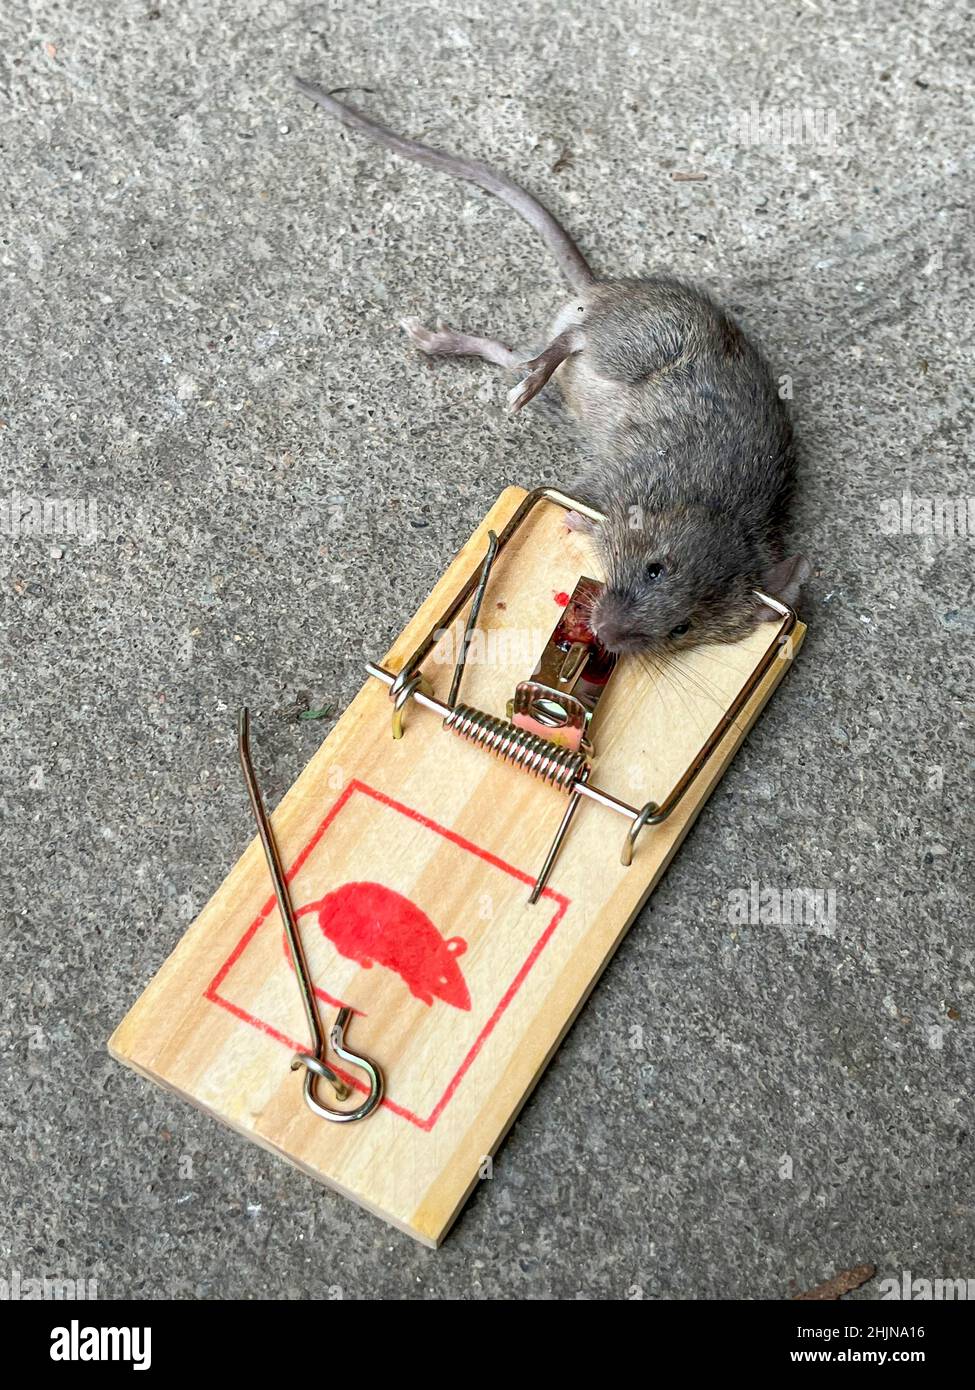 https://c8.alamy.com/comp/2HJNA16/leipzig-germany-30th-jan-2022-a-dead-mouse-lies-in-a-mousetrap-in-a-garage-the-rodent-was-lured-into-the-beating-trap-with-a-piece-of-chocolate-credit-jan-woitasdpa-zentralbildzbdpaalamy-live-news-2HJNA16.jpg